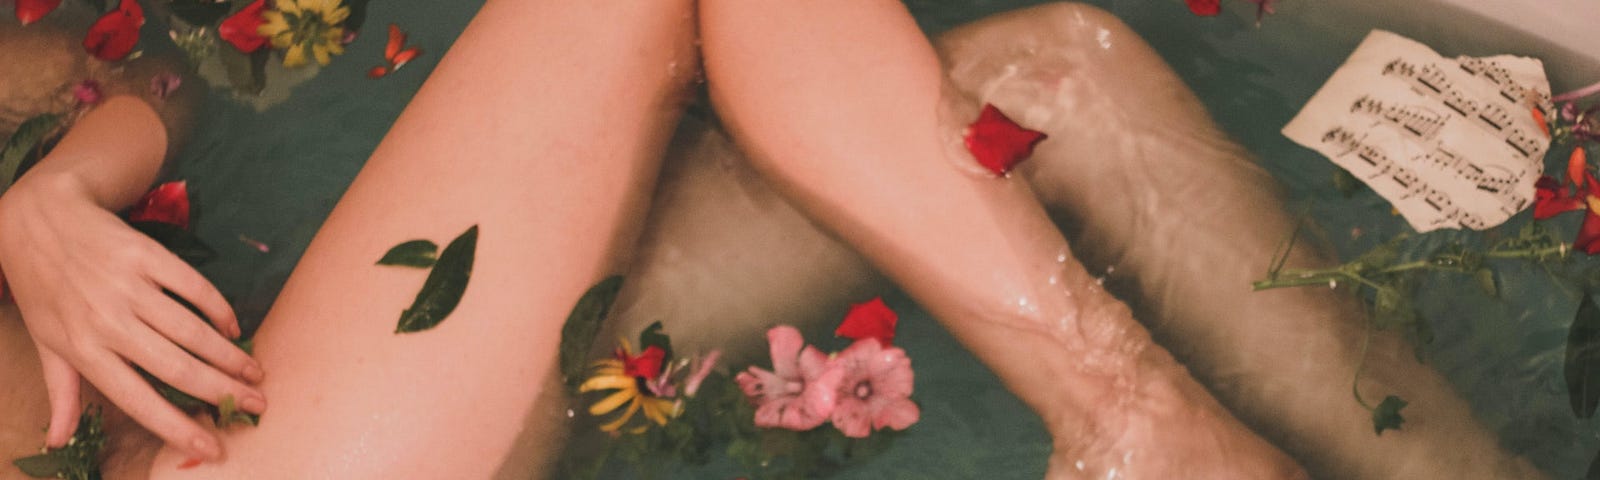 naked legs bathing in a bath with flowers